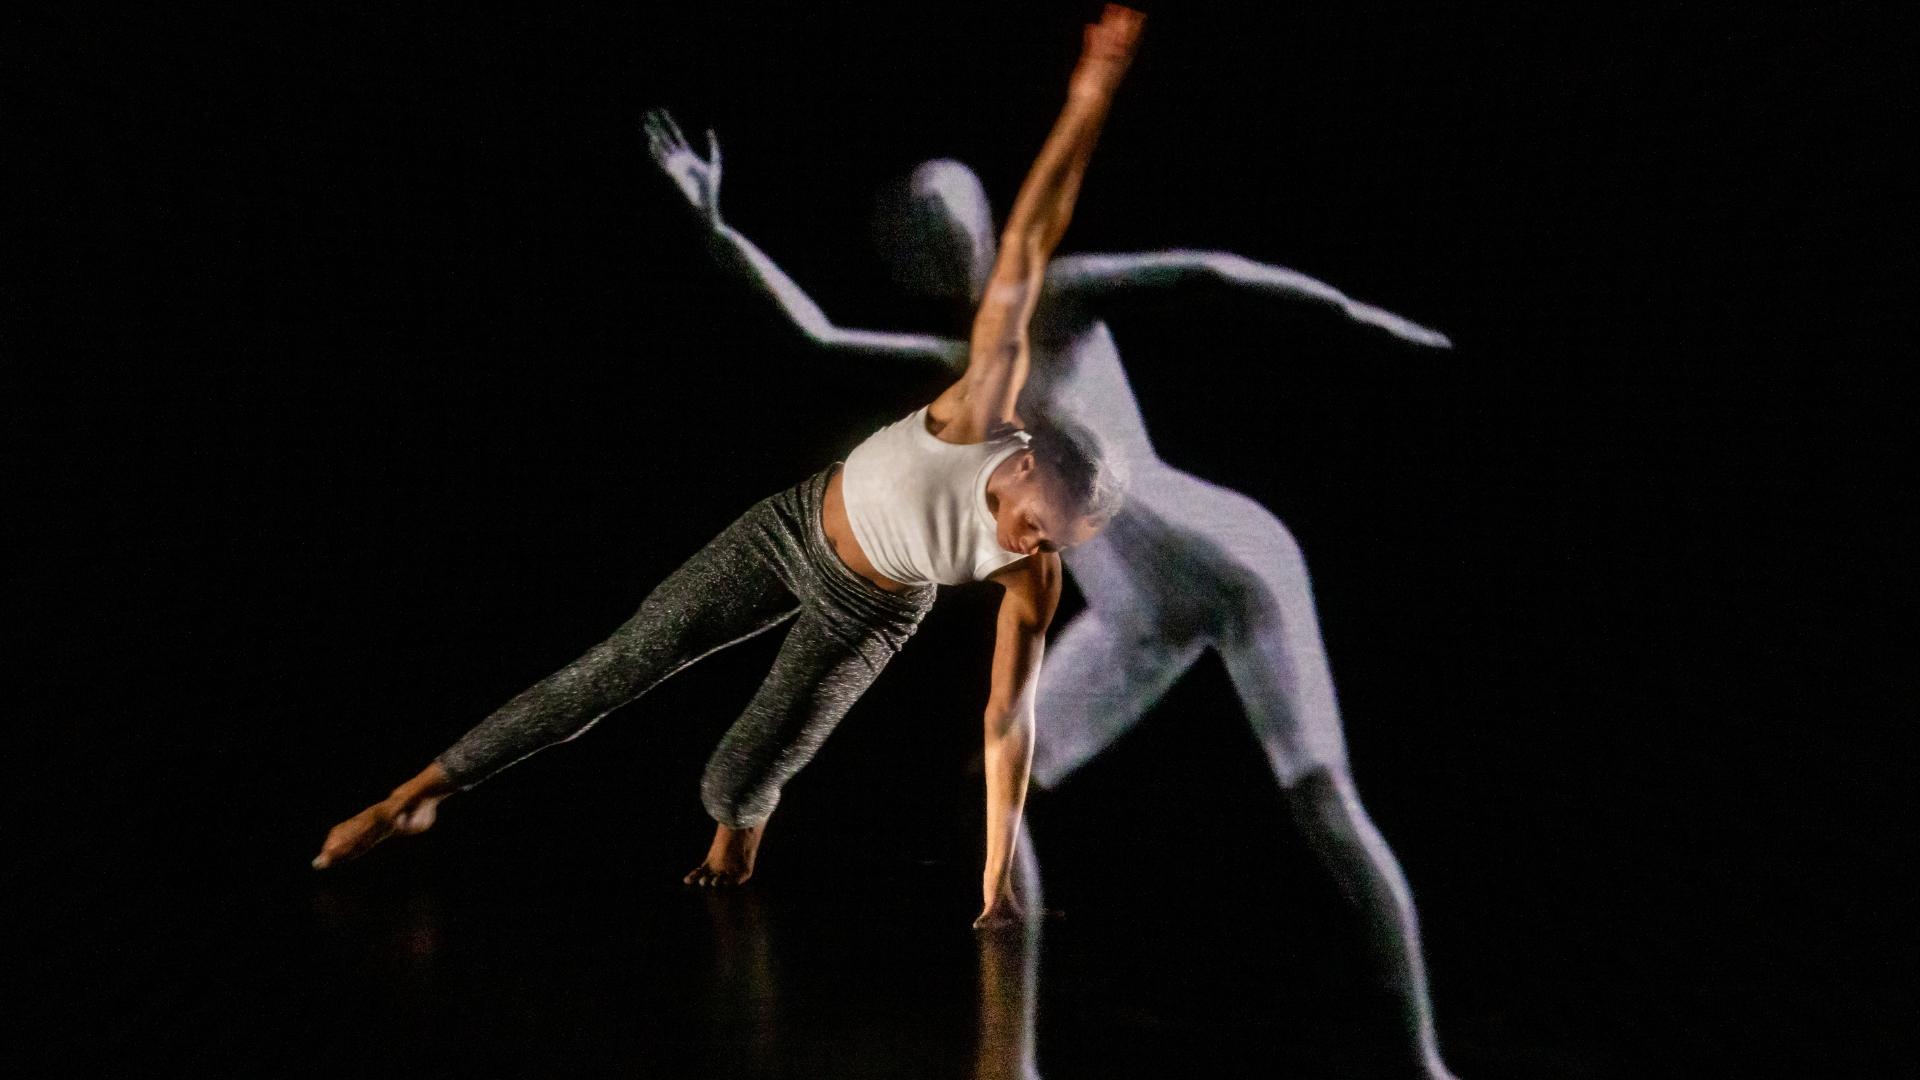 A Kennesaw State University dance student and the LuminAI-powered avatar dance together.